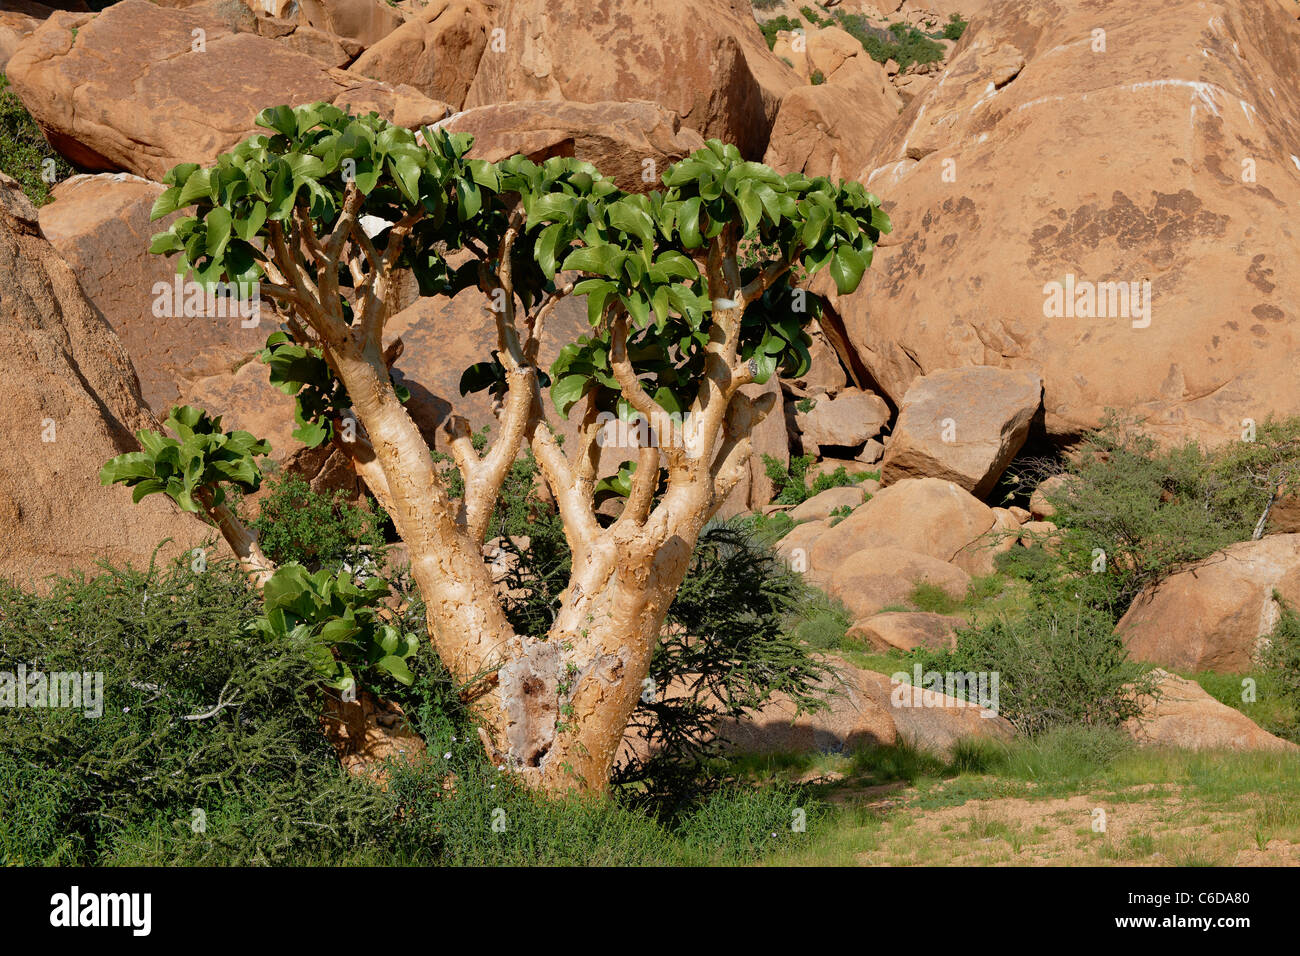 cobas tree or butter tree, succulent tree, Cyphostemma currorii, Spitzkoppe, mountain landscape with granite rocks, Namibia Stock Photo